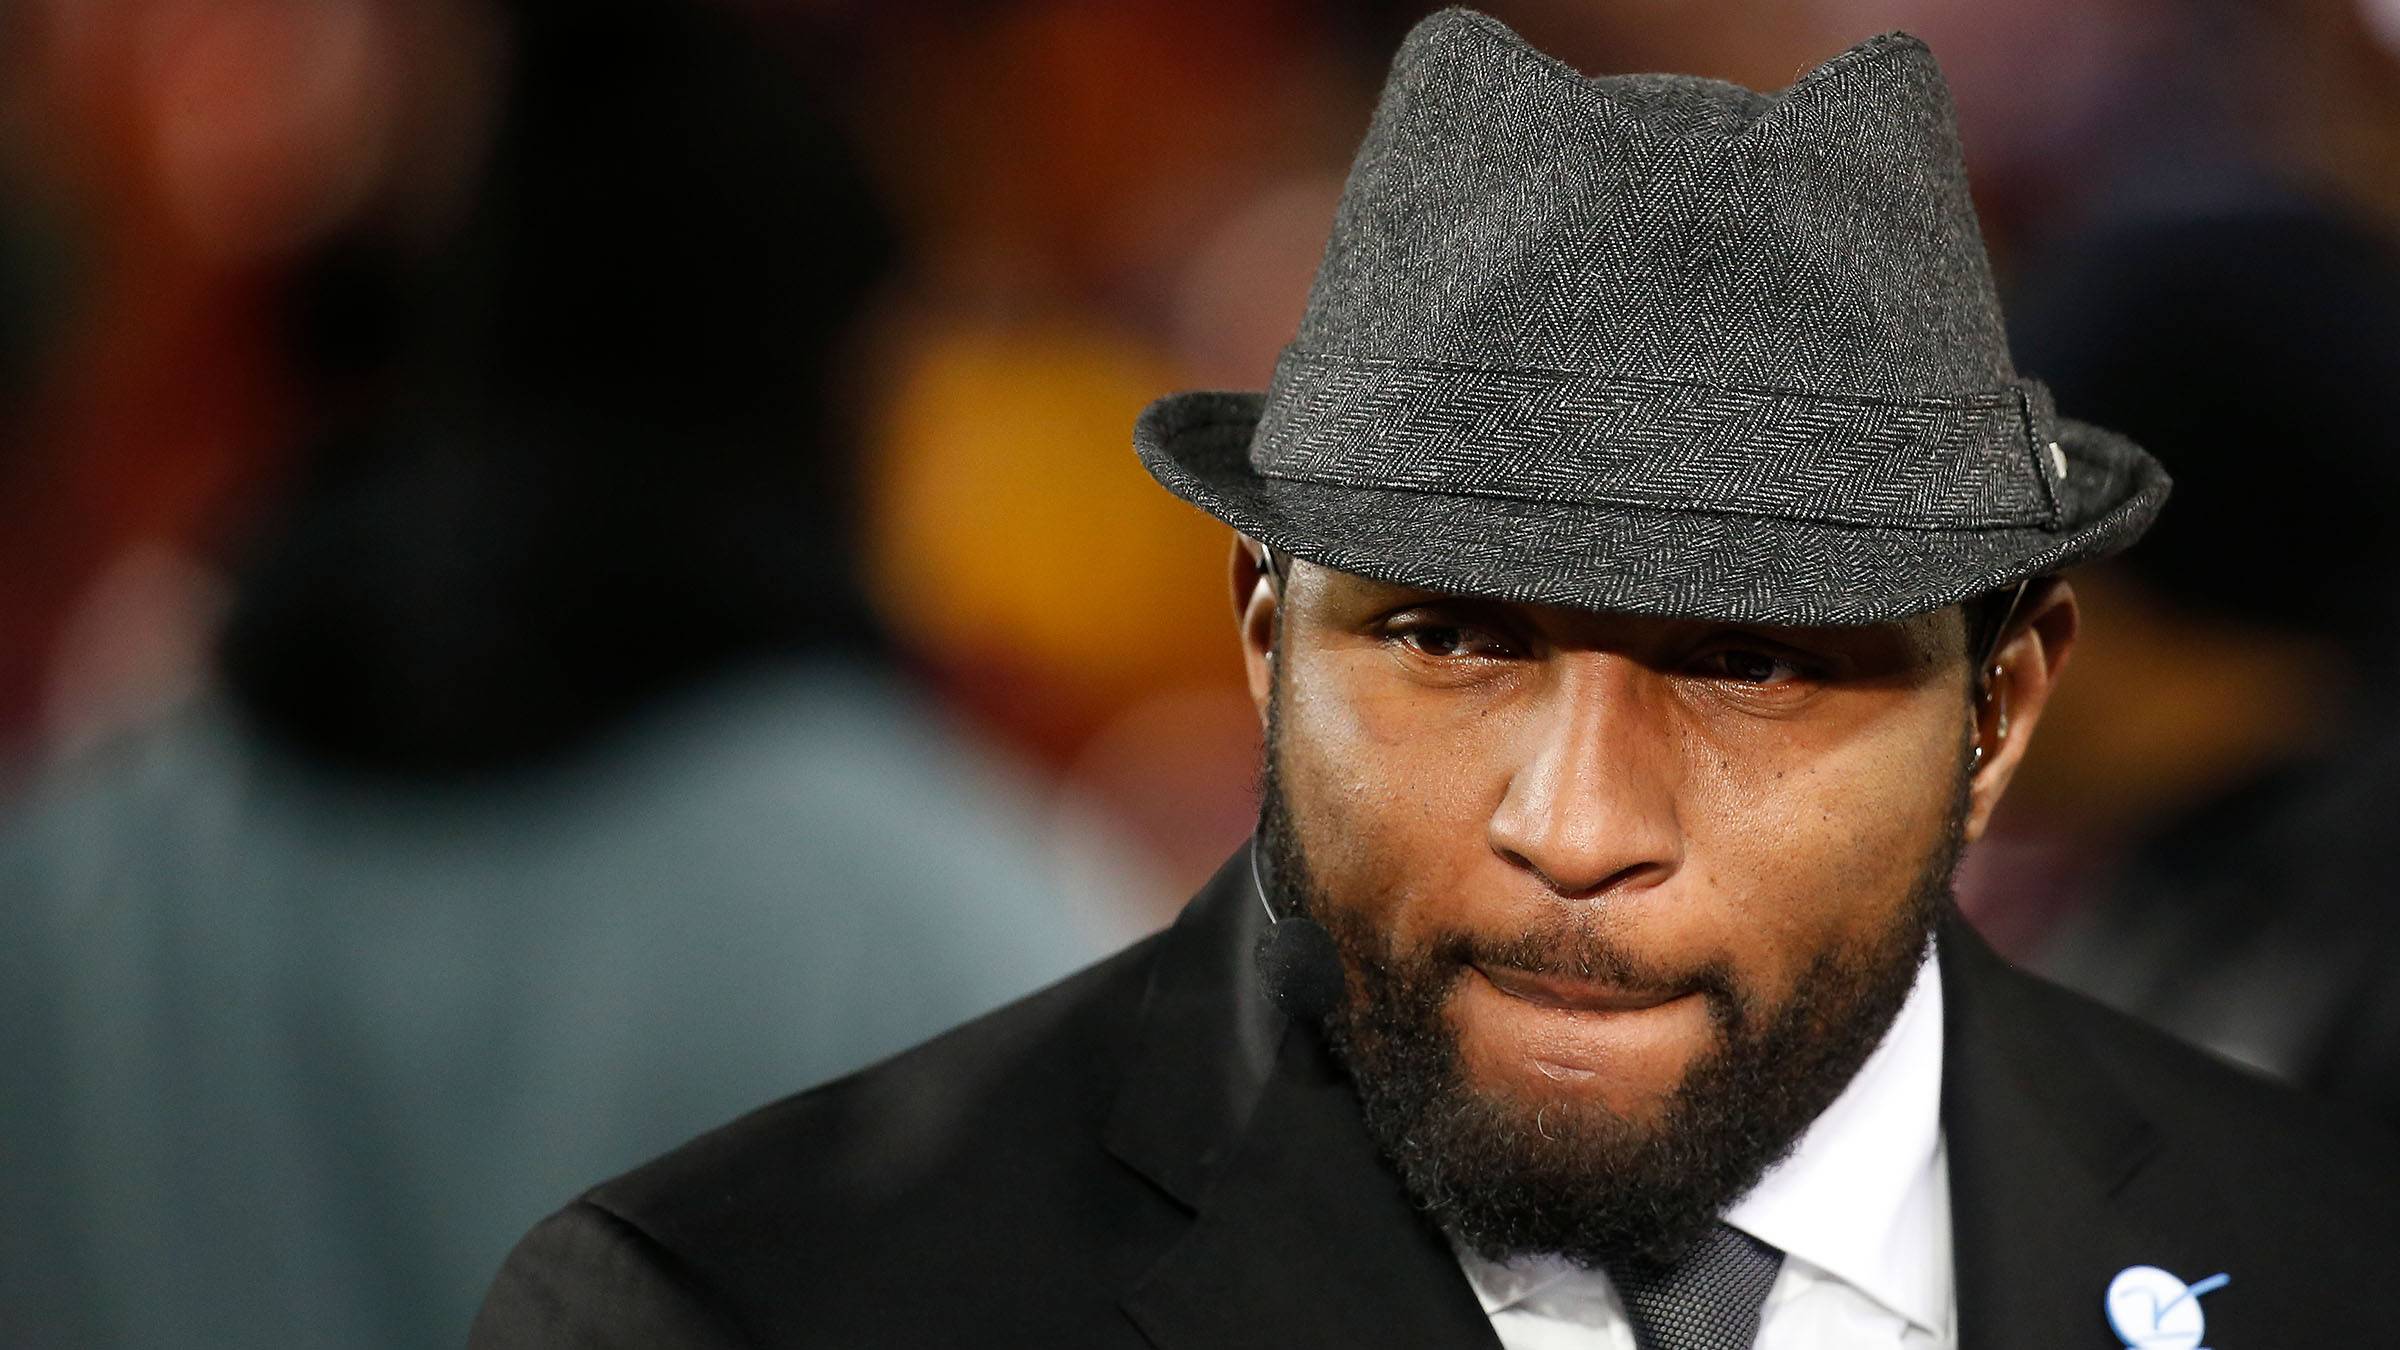 Ray Lewis III, son of football hall-of-Famer Ray Lewis, has died